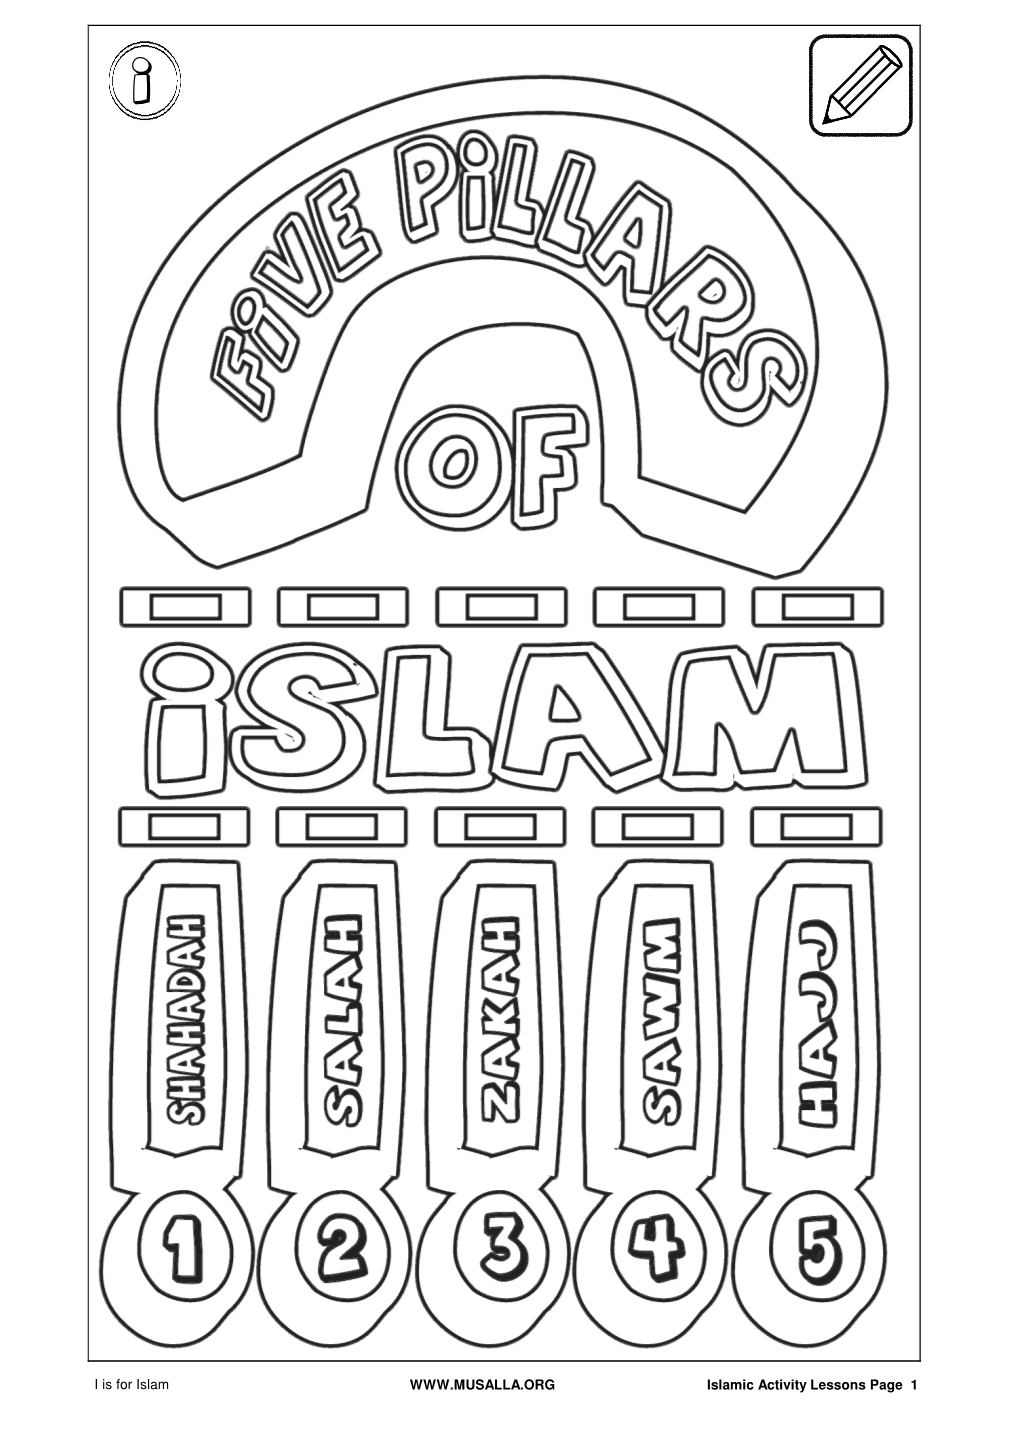 Islamic Activity Lessons Page 1 I Is for Islam